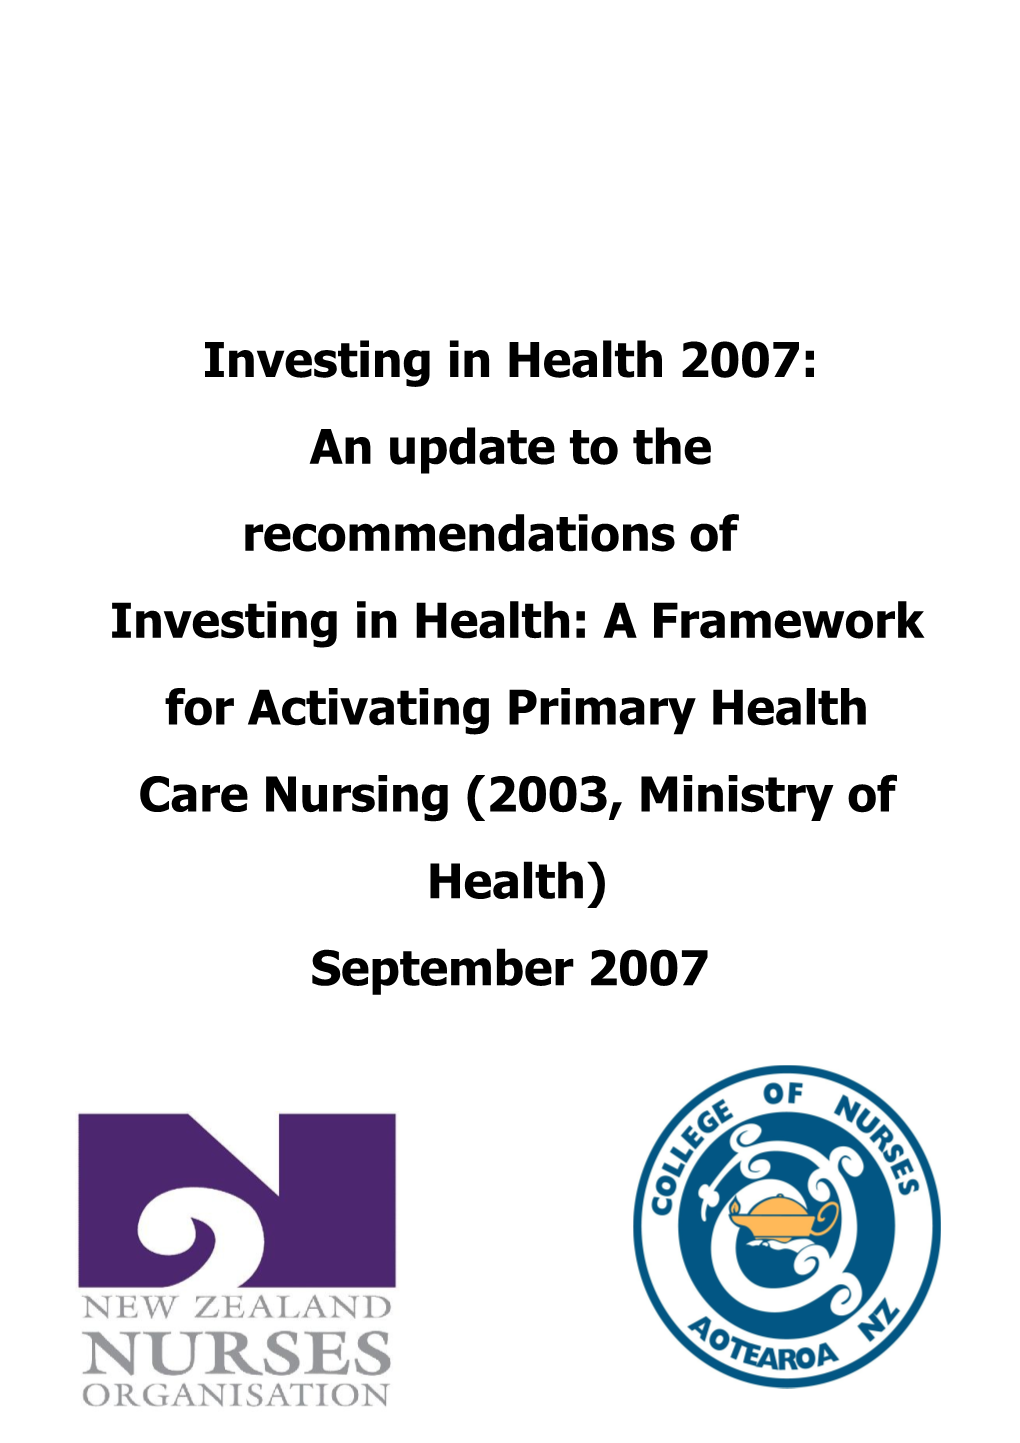 Investing in Health 2007: an Update on the 2003 Ministry of Health Document